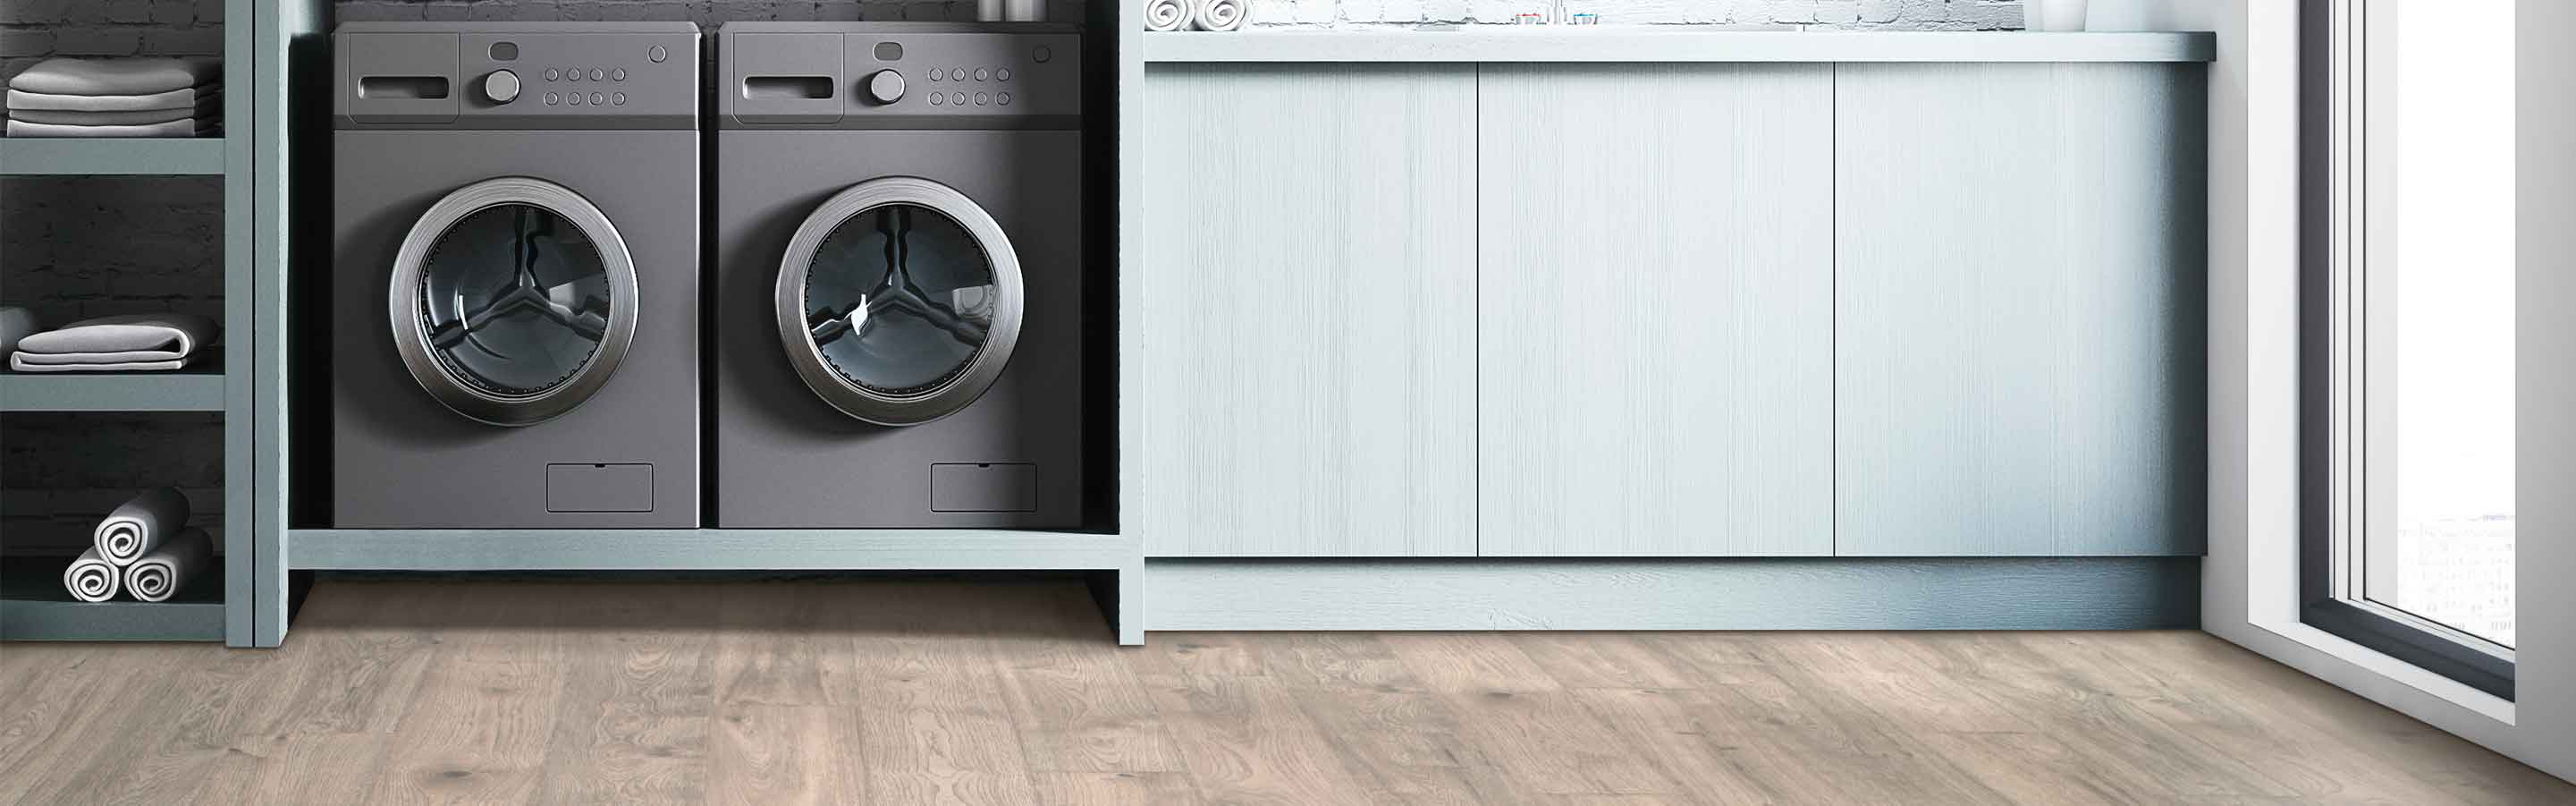 dark rustic laminate wood look flooring in laundry room with grey washing machine and dryer